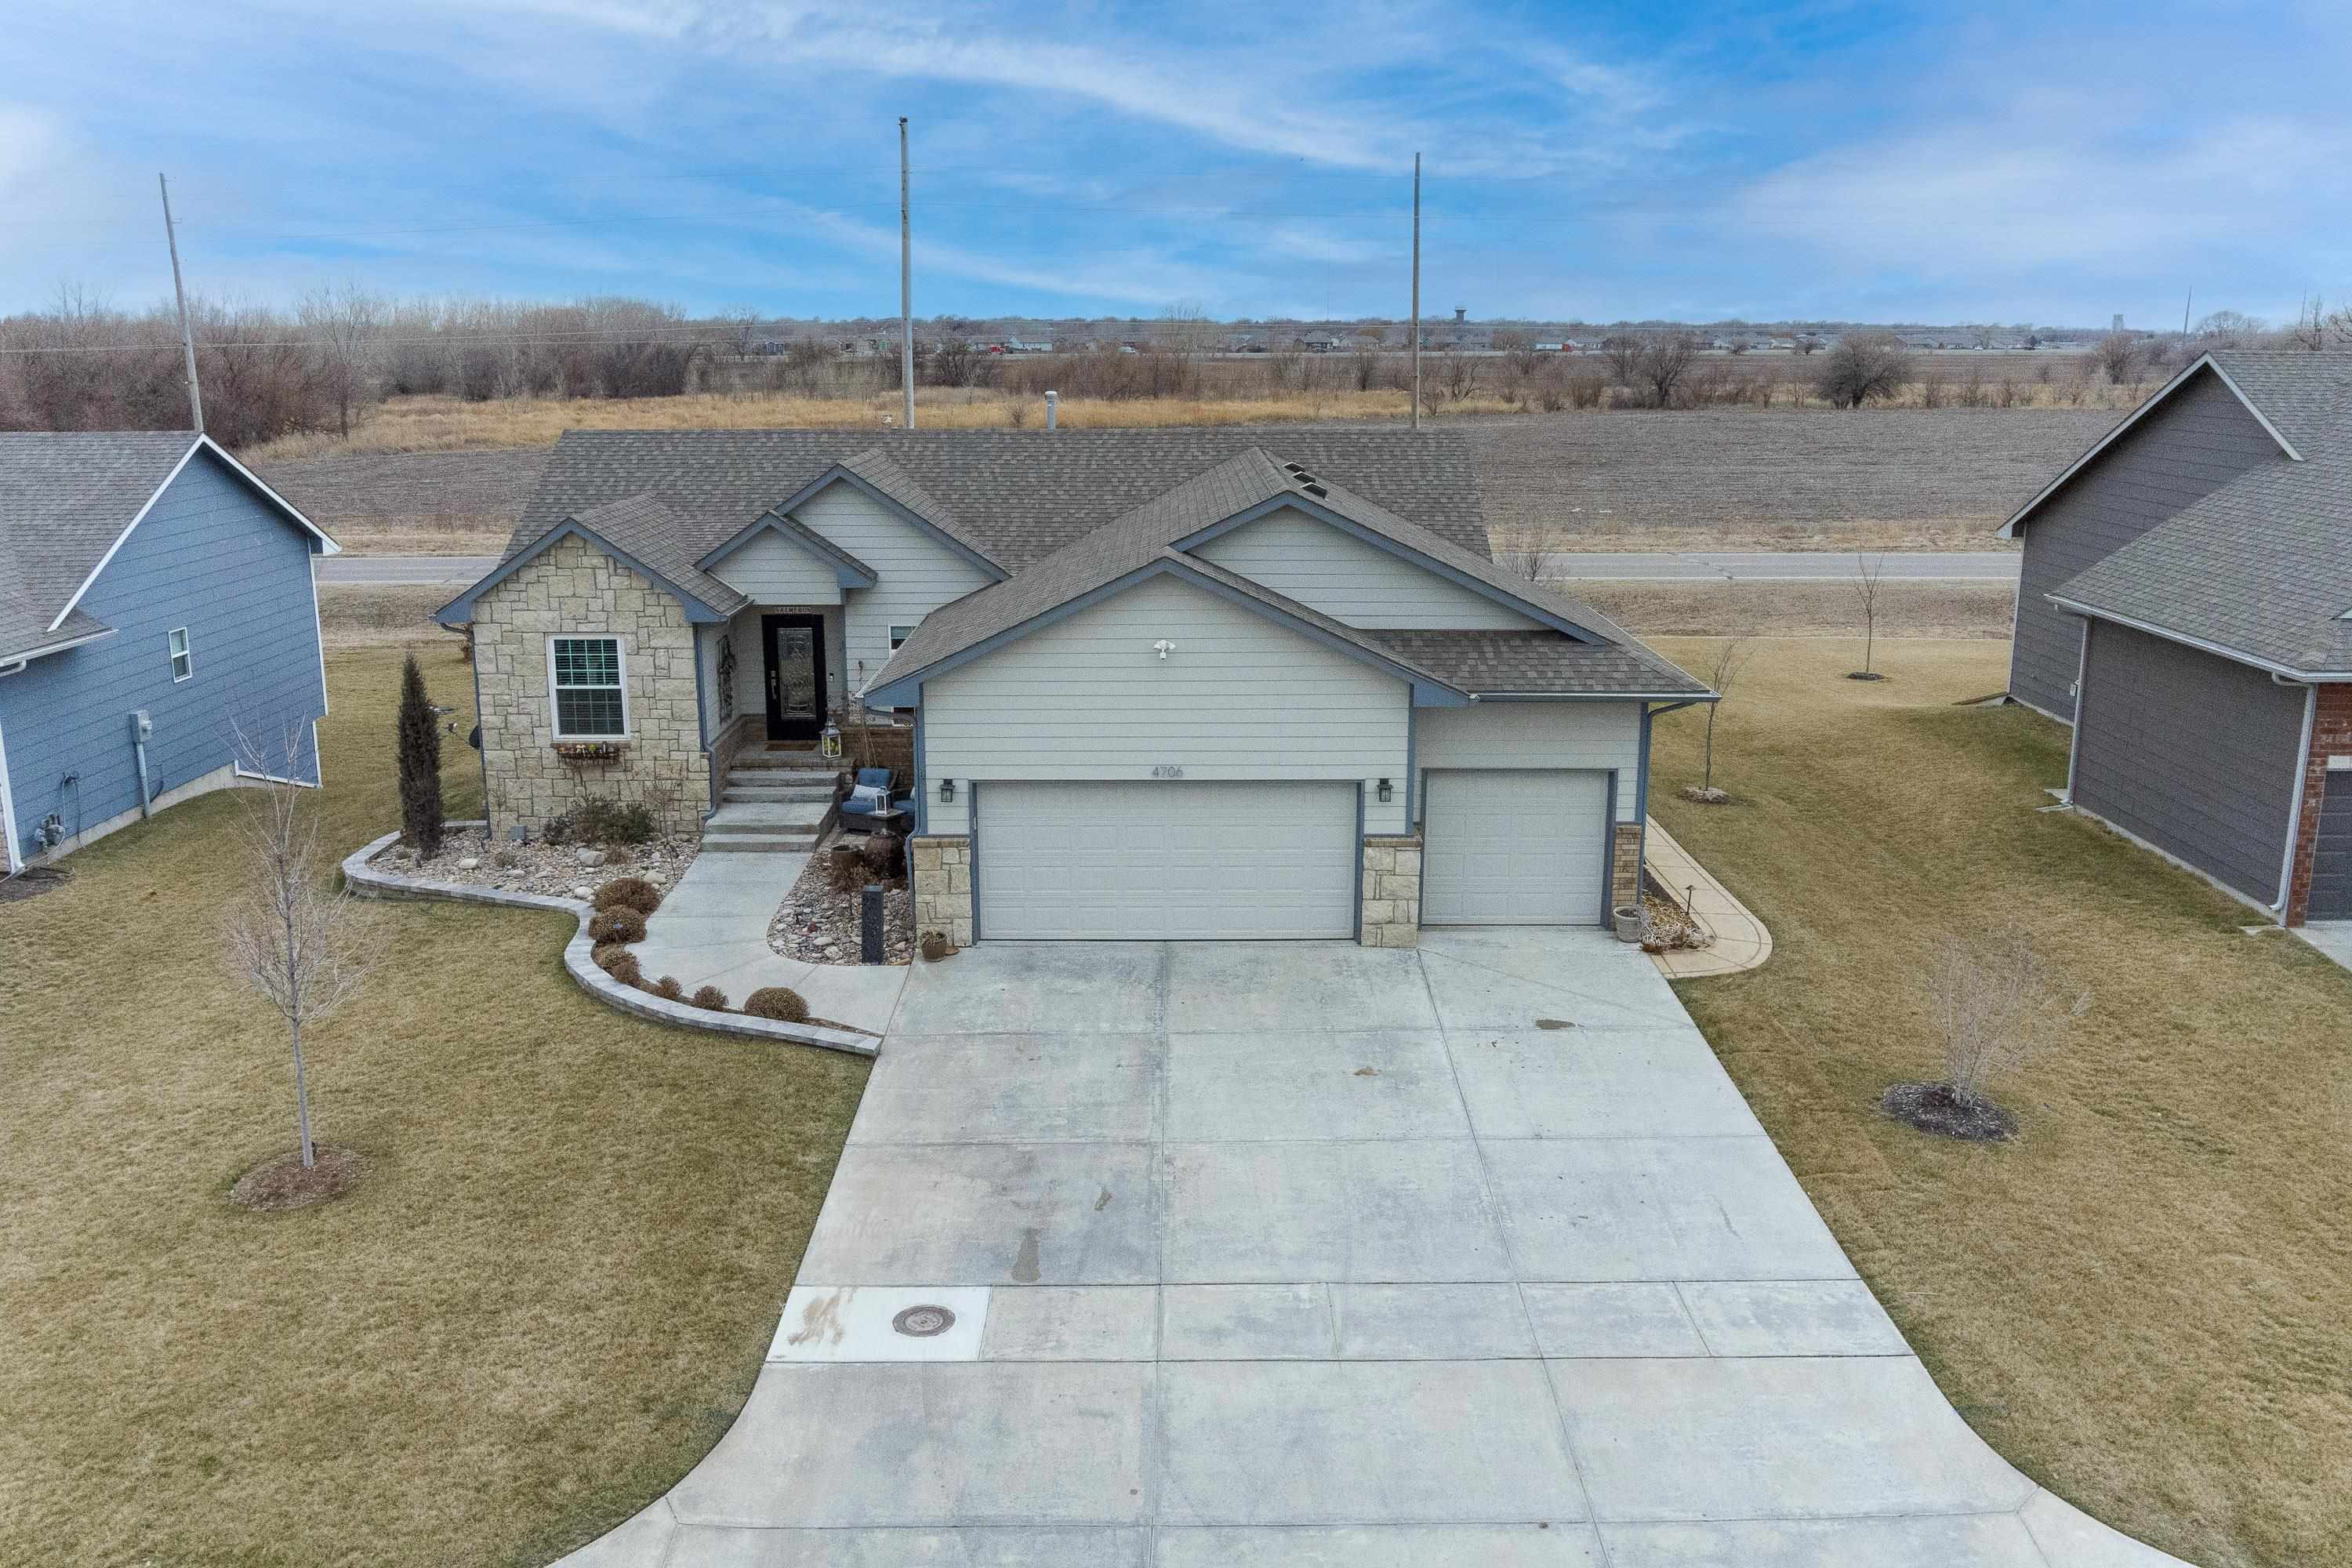 Desirable Emerald Springs Area & Maize schools. This beautiful 4 year old home has everything you ne